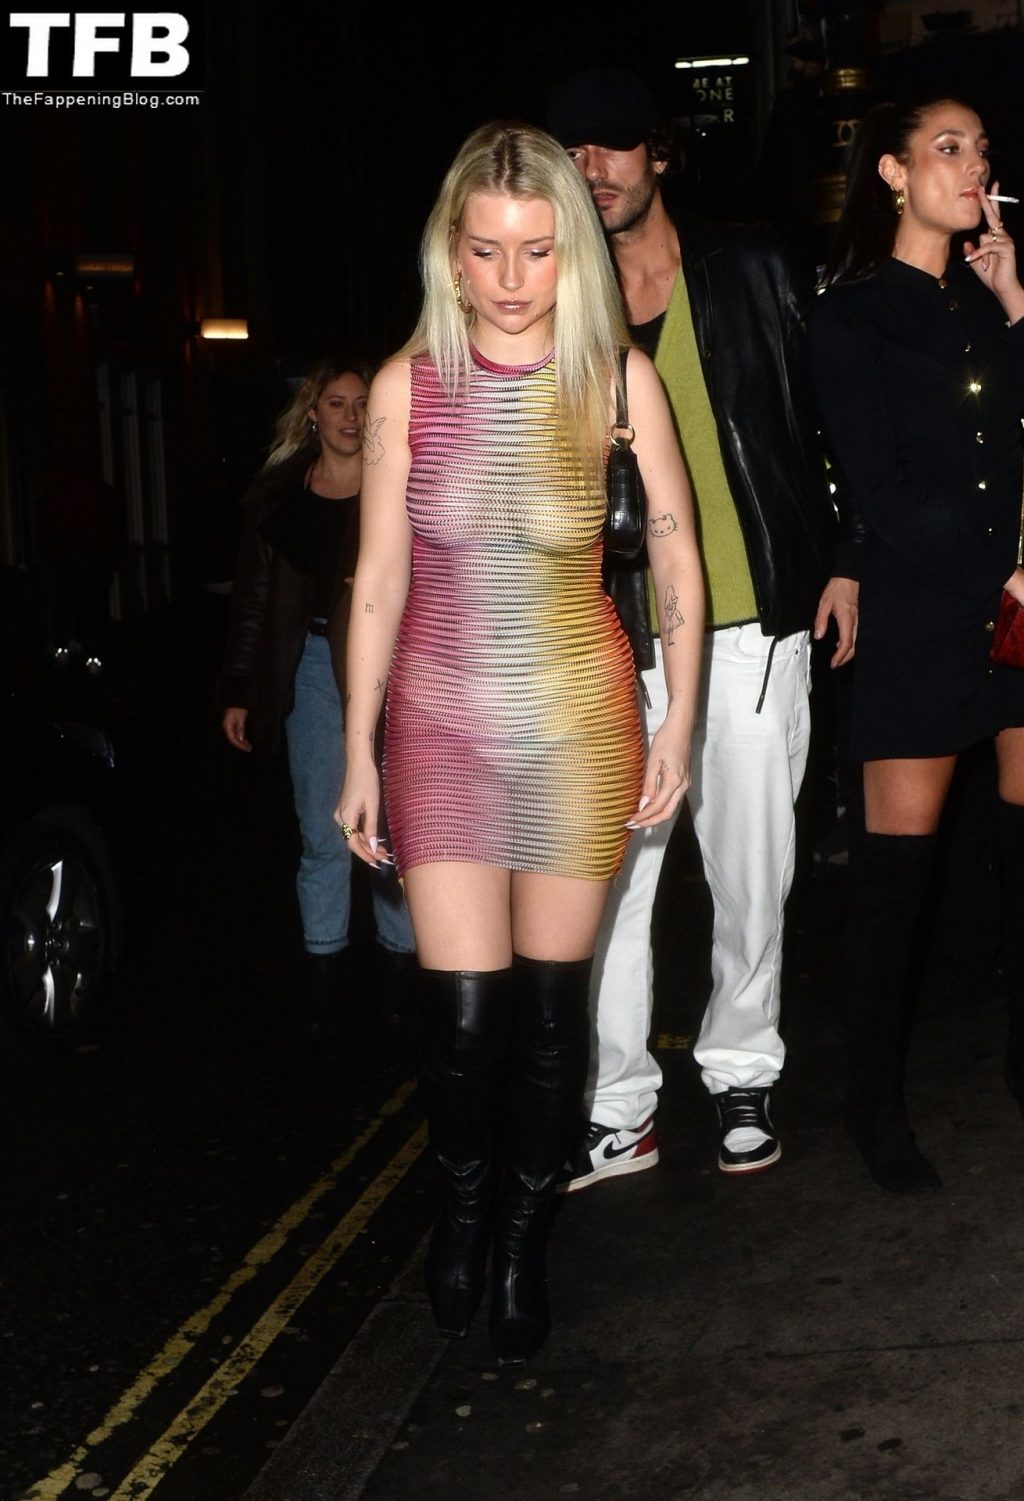 Lottie Moss is Seen in a See-Through Dress at The Windmill In Soho (11 Photos)